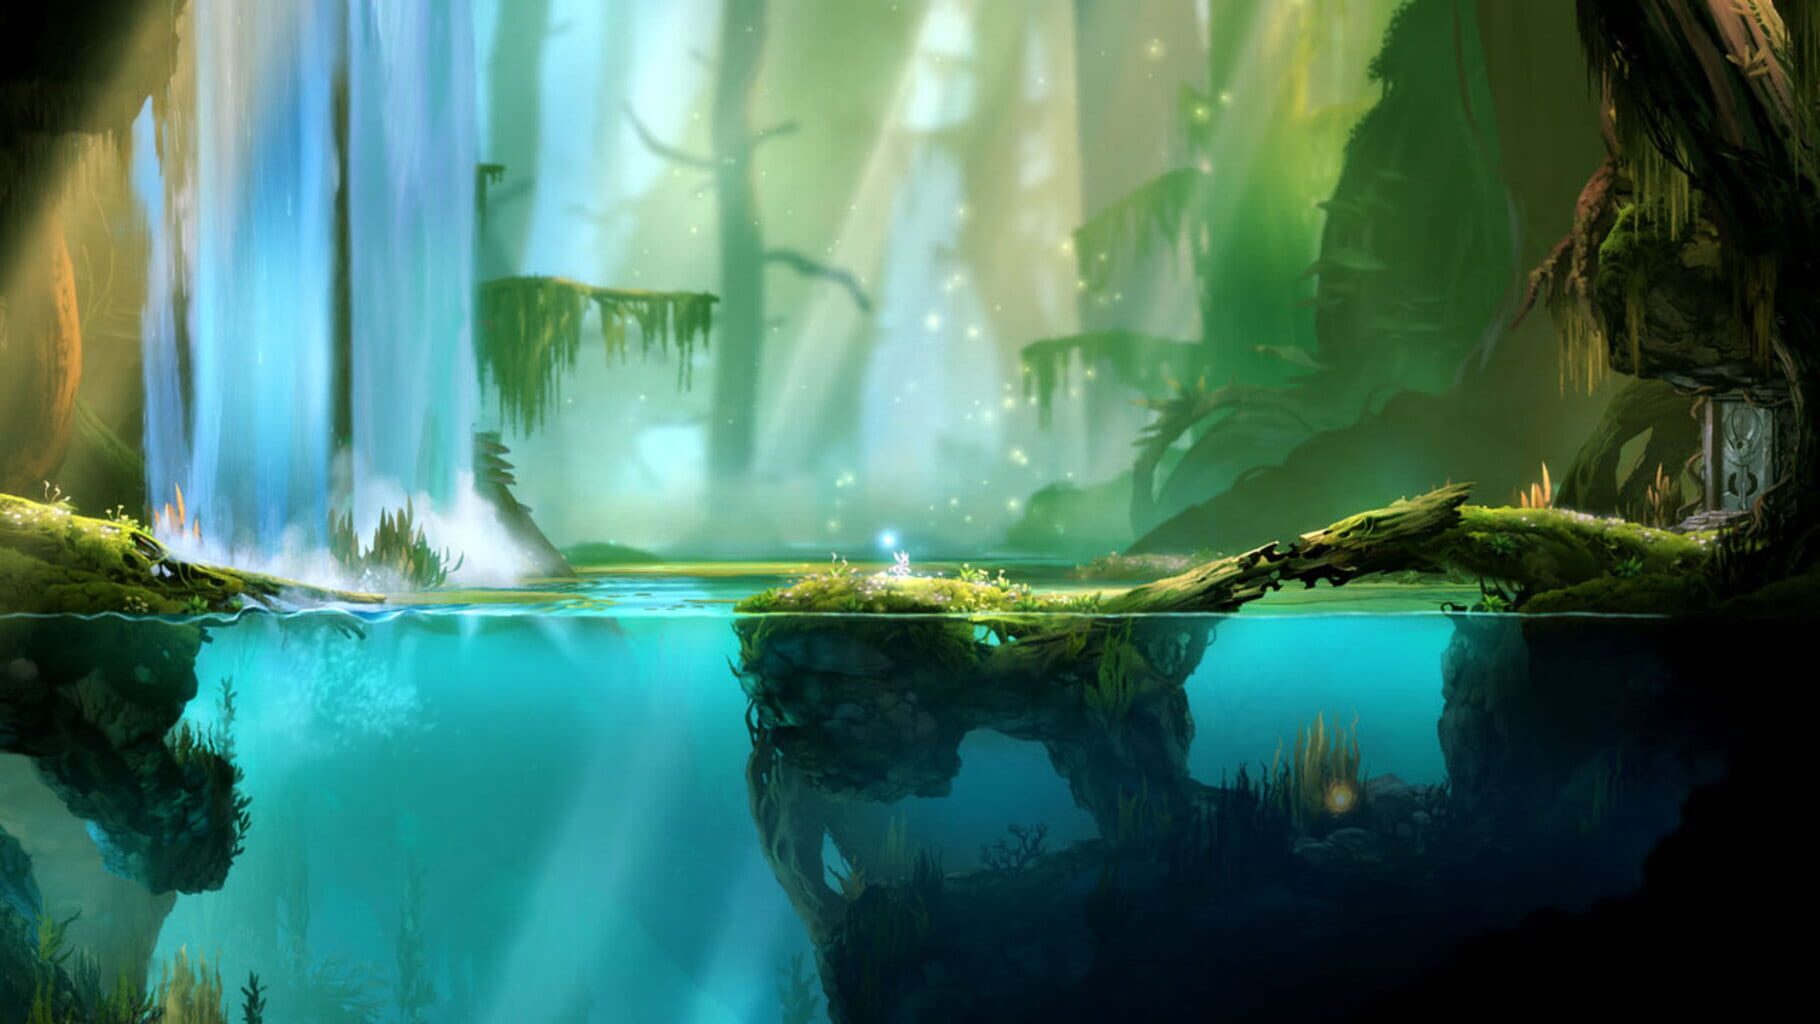 Ori and the Blind Forest: Definitive Edition screenshots